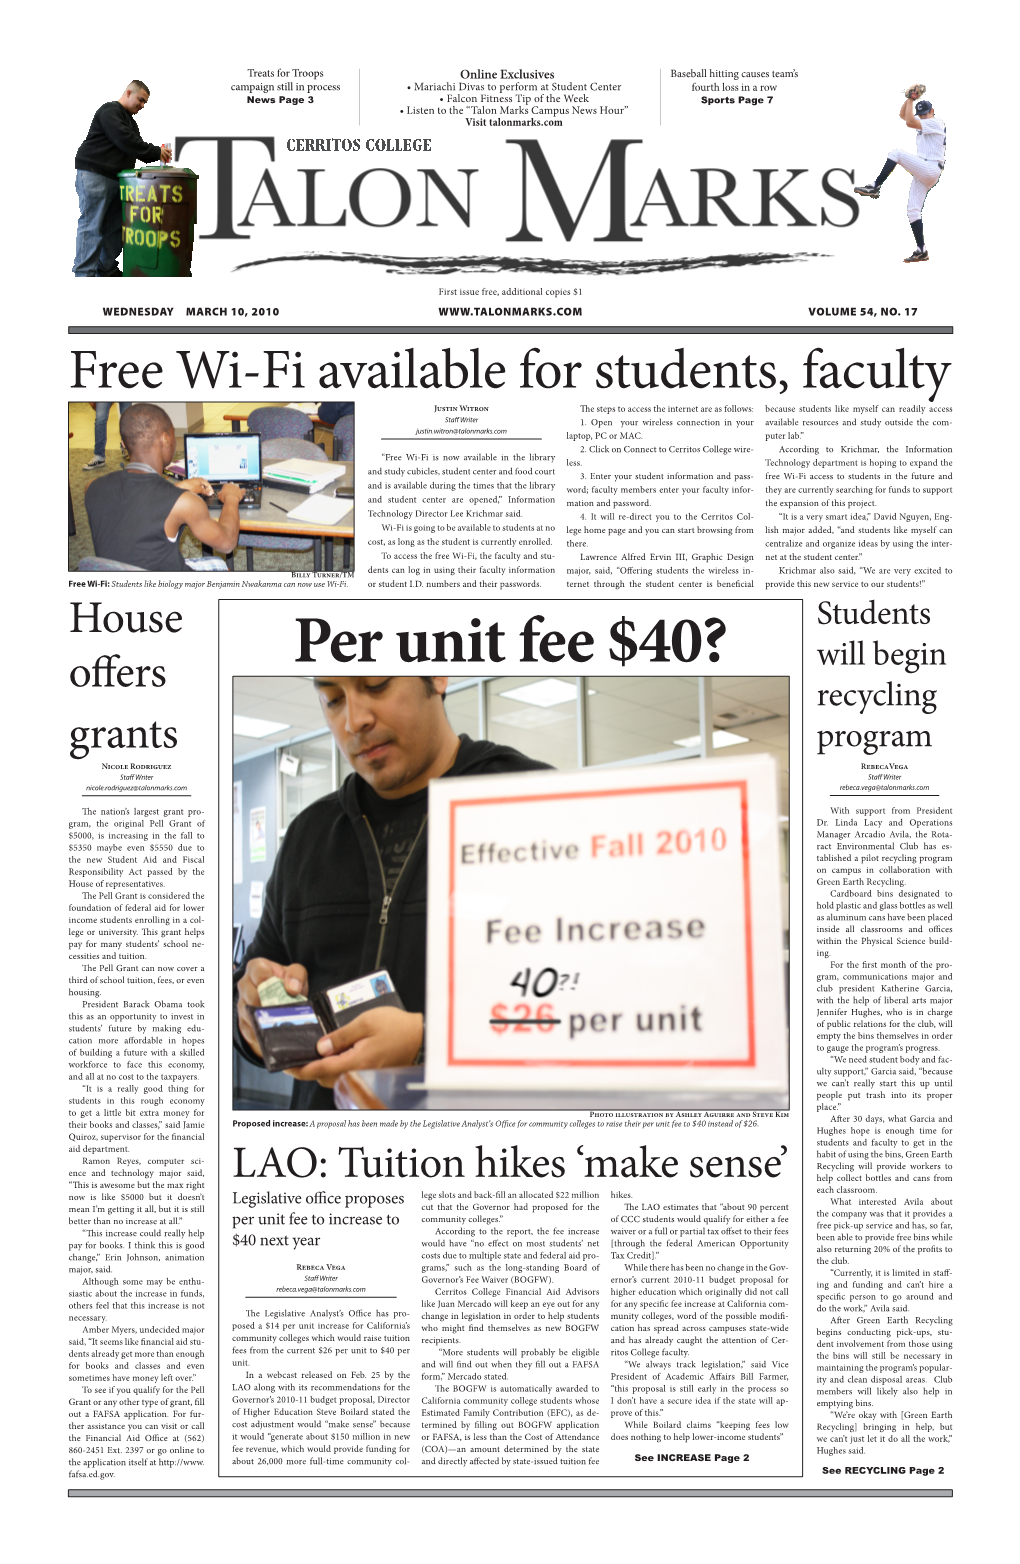 Free Wi-Fi Available for Students, Faculty